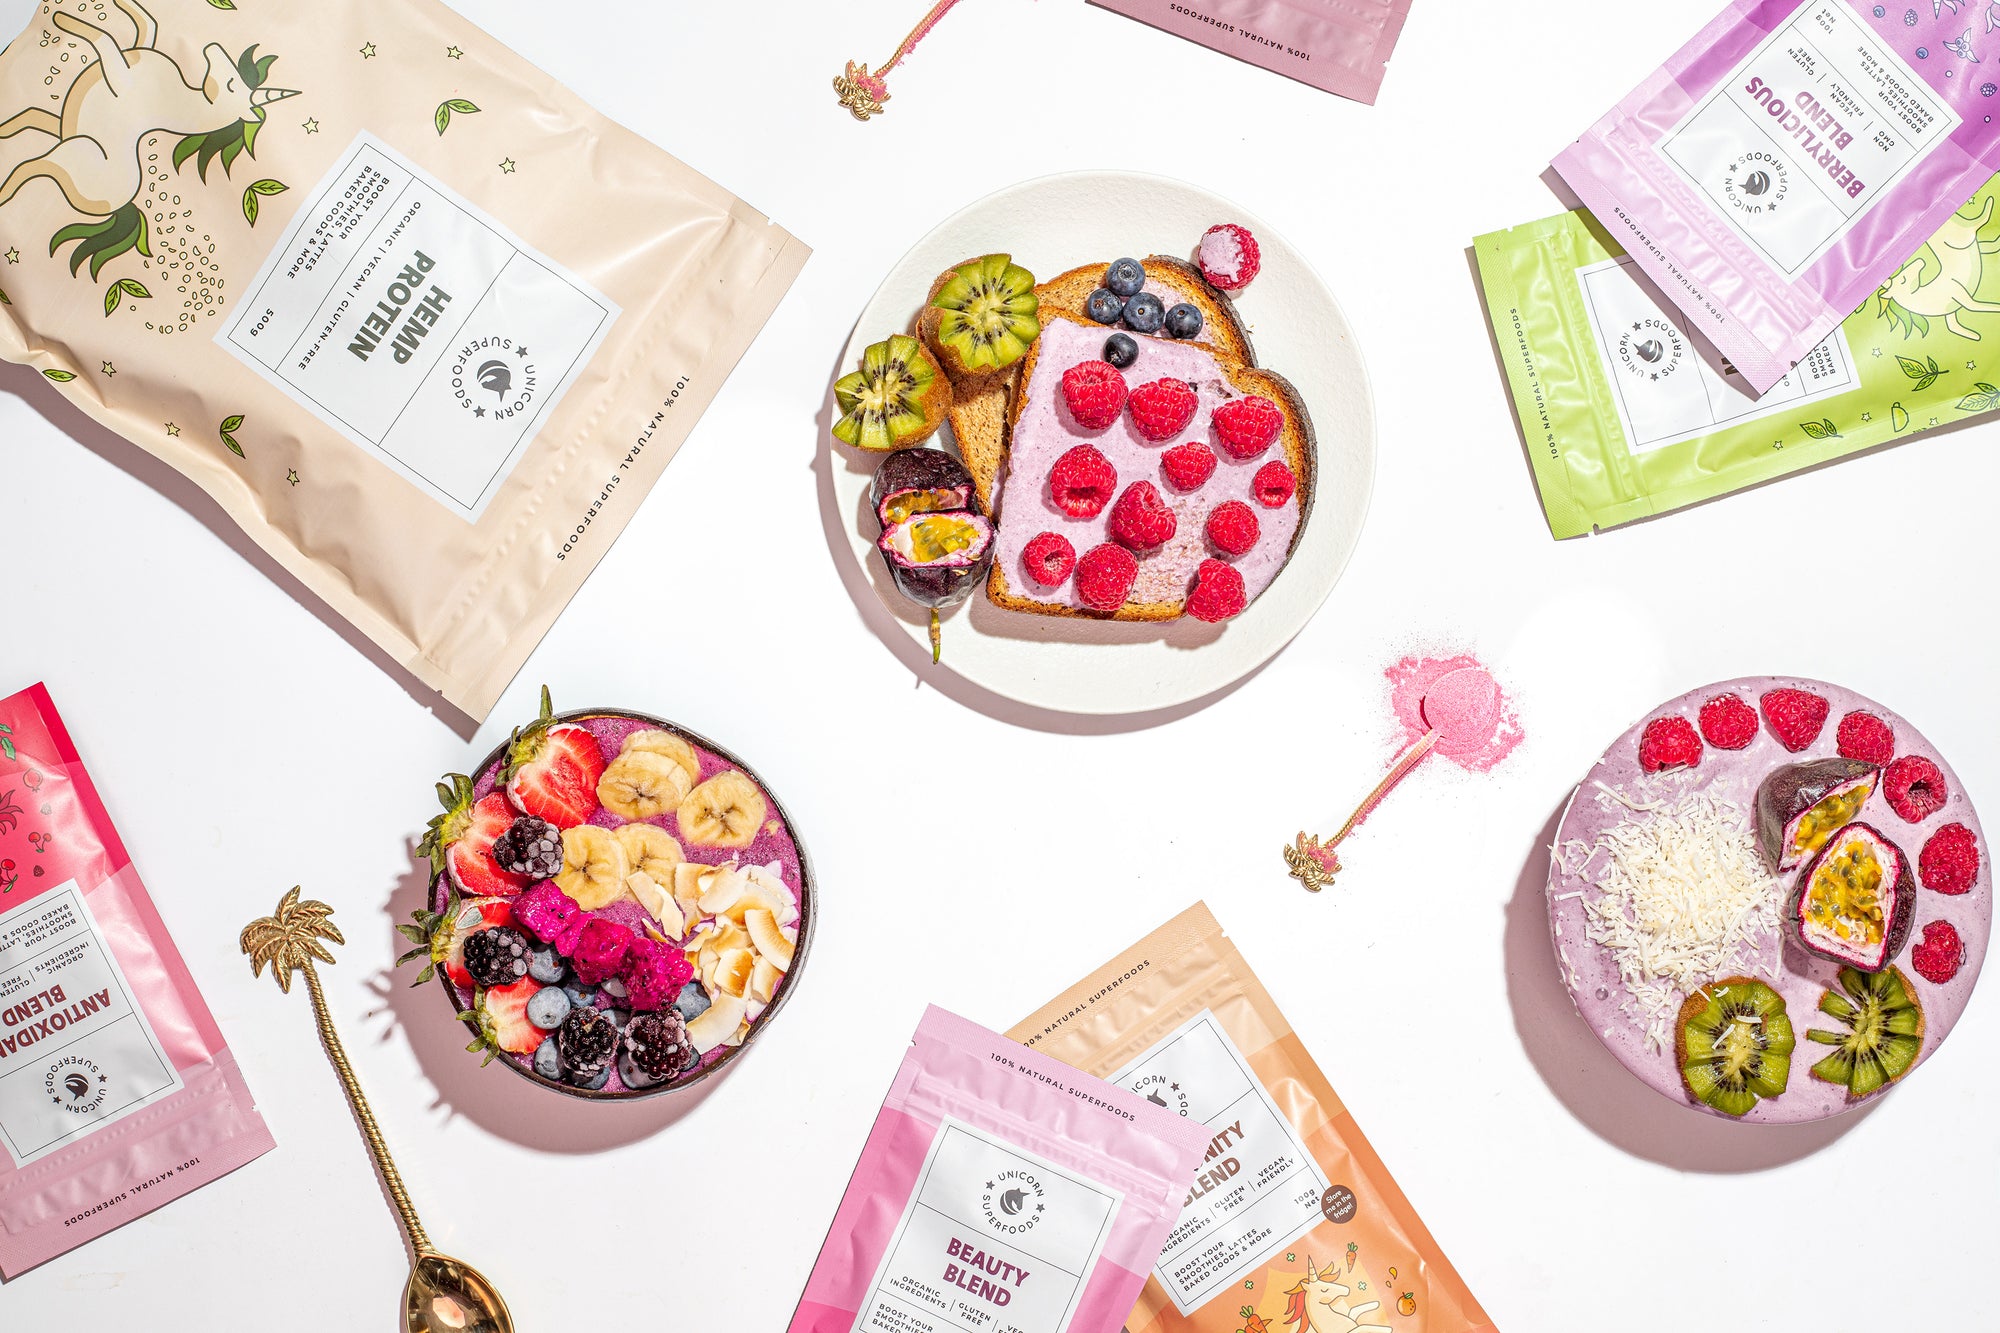 Coconut Bowls Q&A Series: Meet the Unicorn Superfood Sisters!